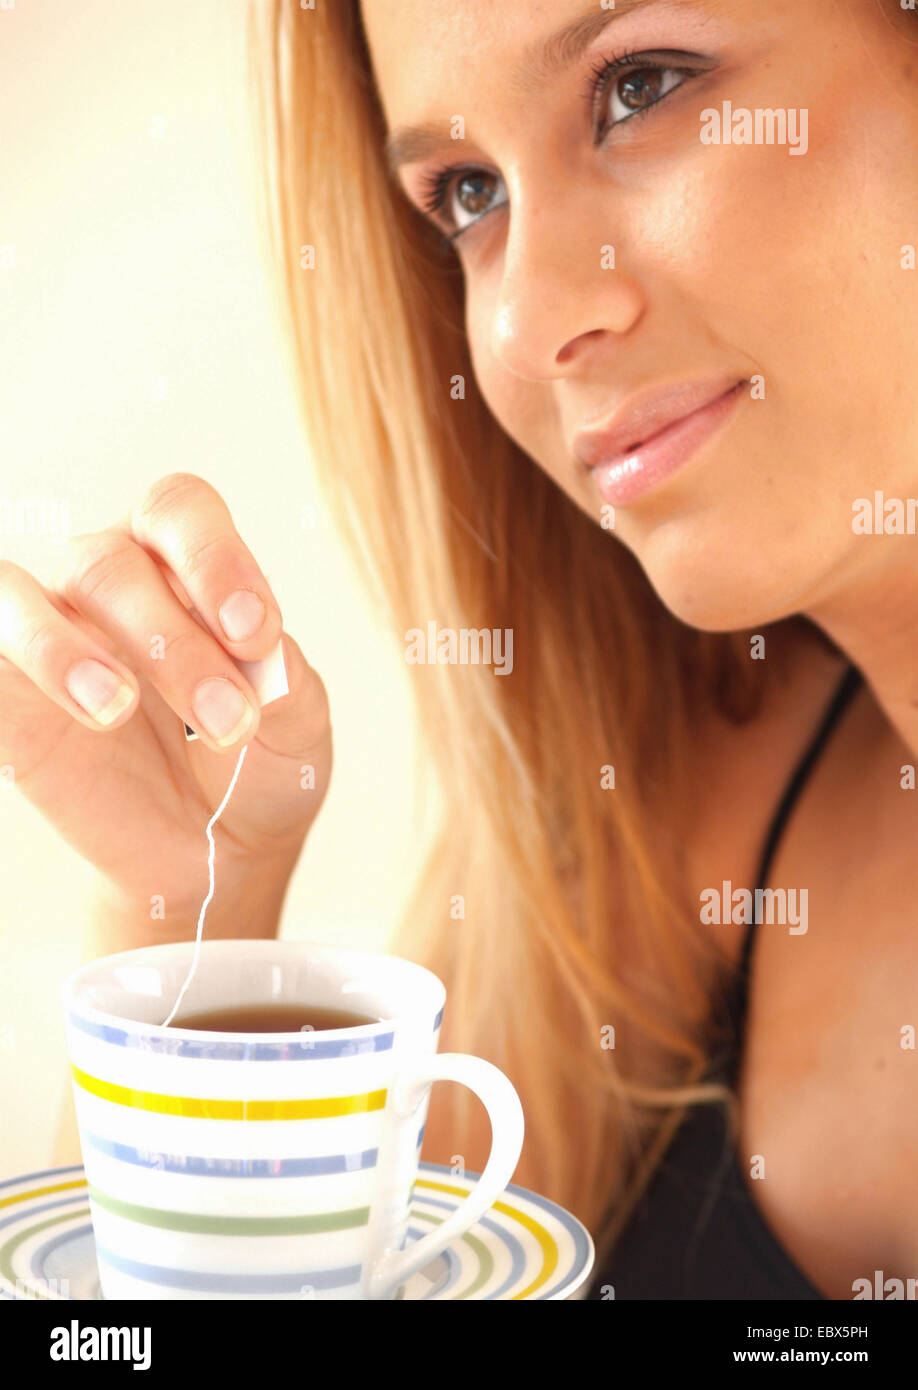 young woman radiating serenity is dipping a tea bag into a cup Stock Photo